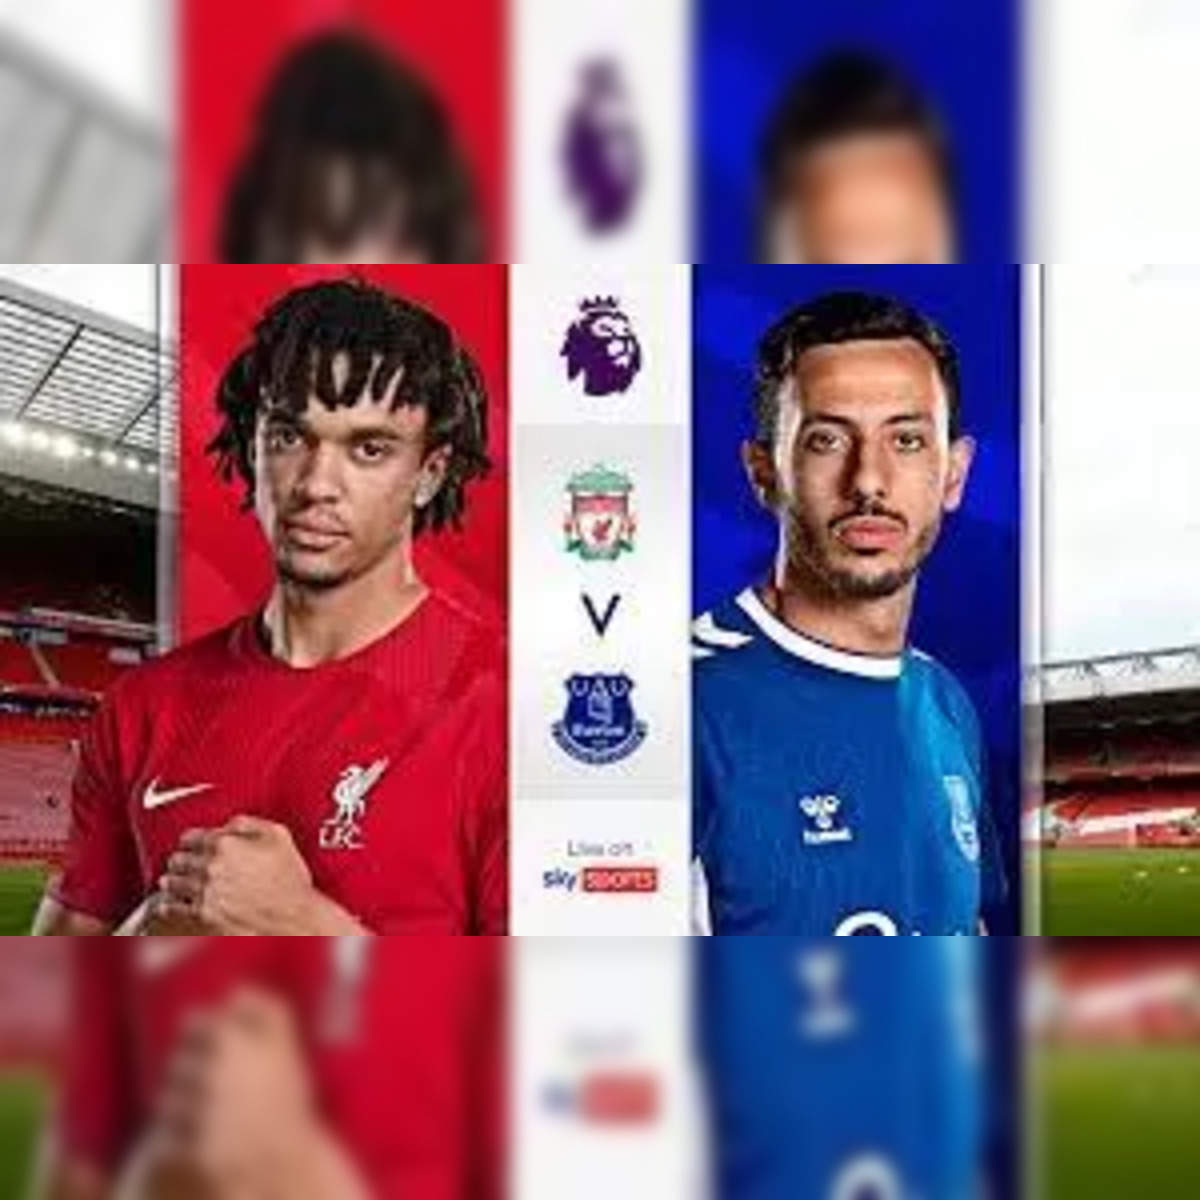 liverpool Liverpool vs Everton Kick-off time, where to watch, TV channel, live stream and more